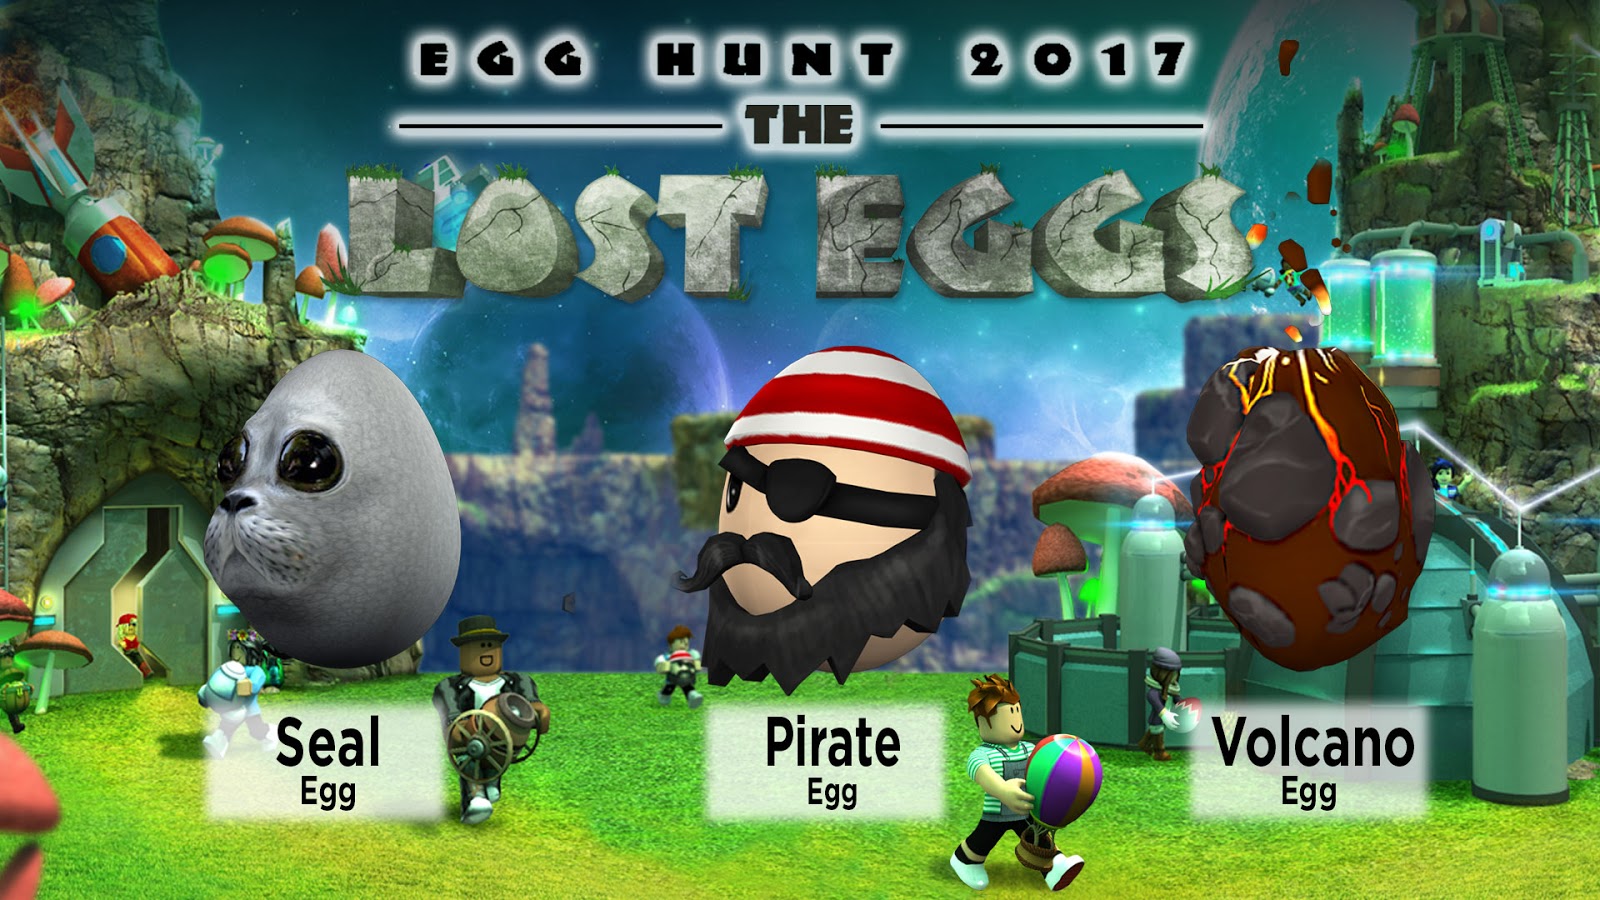 Giveaway Roblox Egg Hunt Prize Pack Mommy Katie - epic bacon soldier game play guest world via roblox